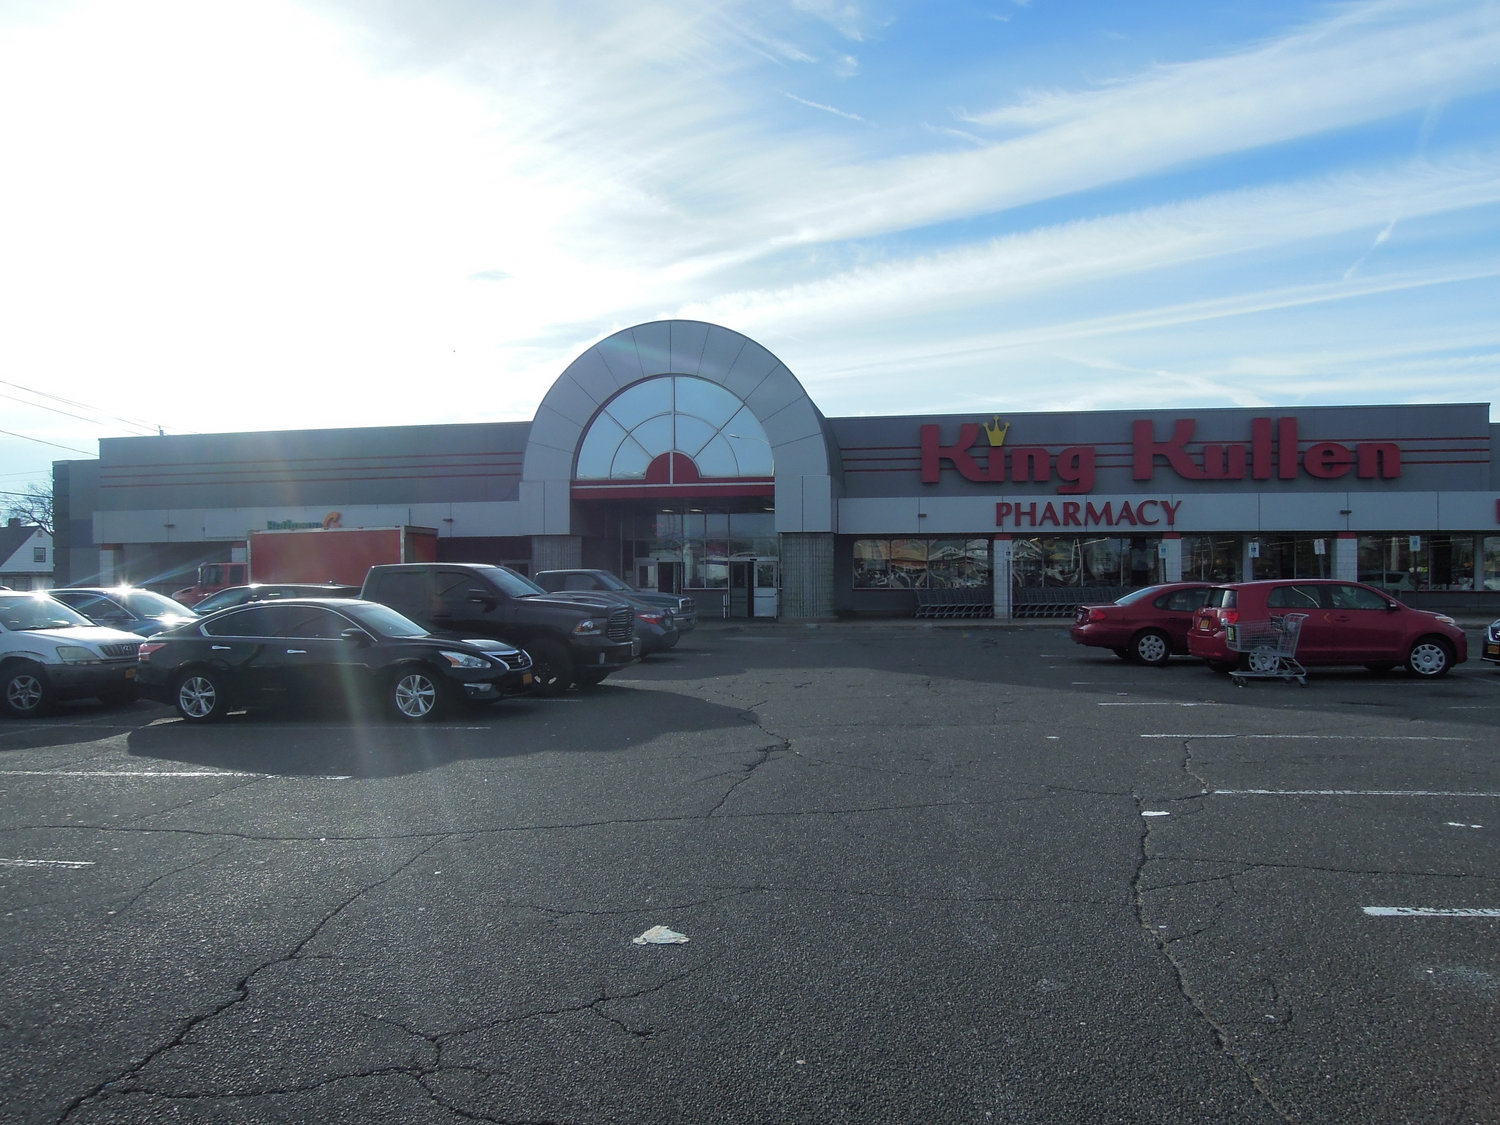 Stop And Shop To Buy King Kullen Grocery Chain Herald Community